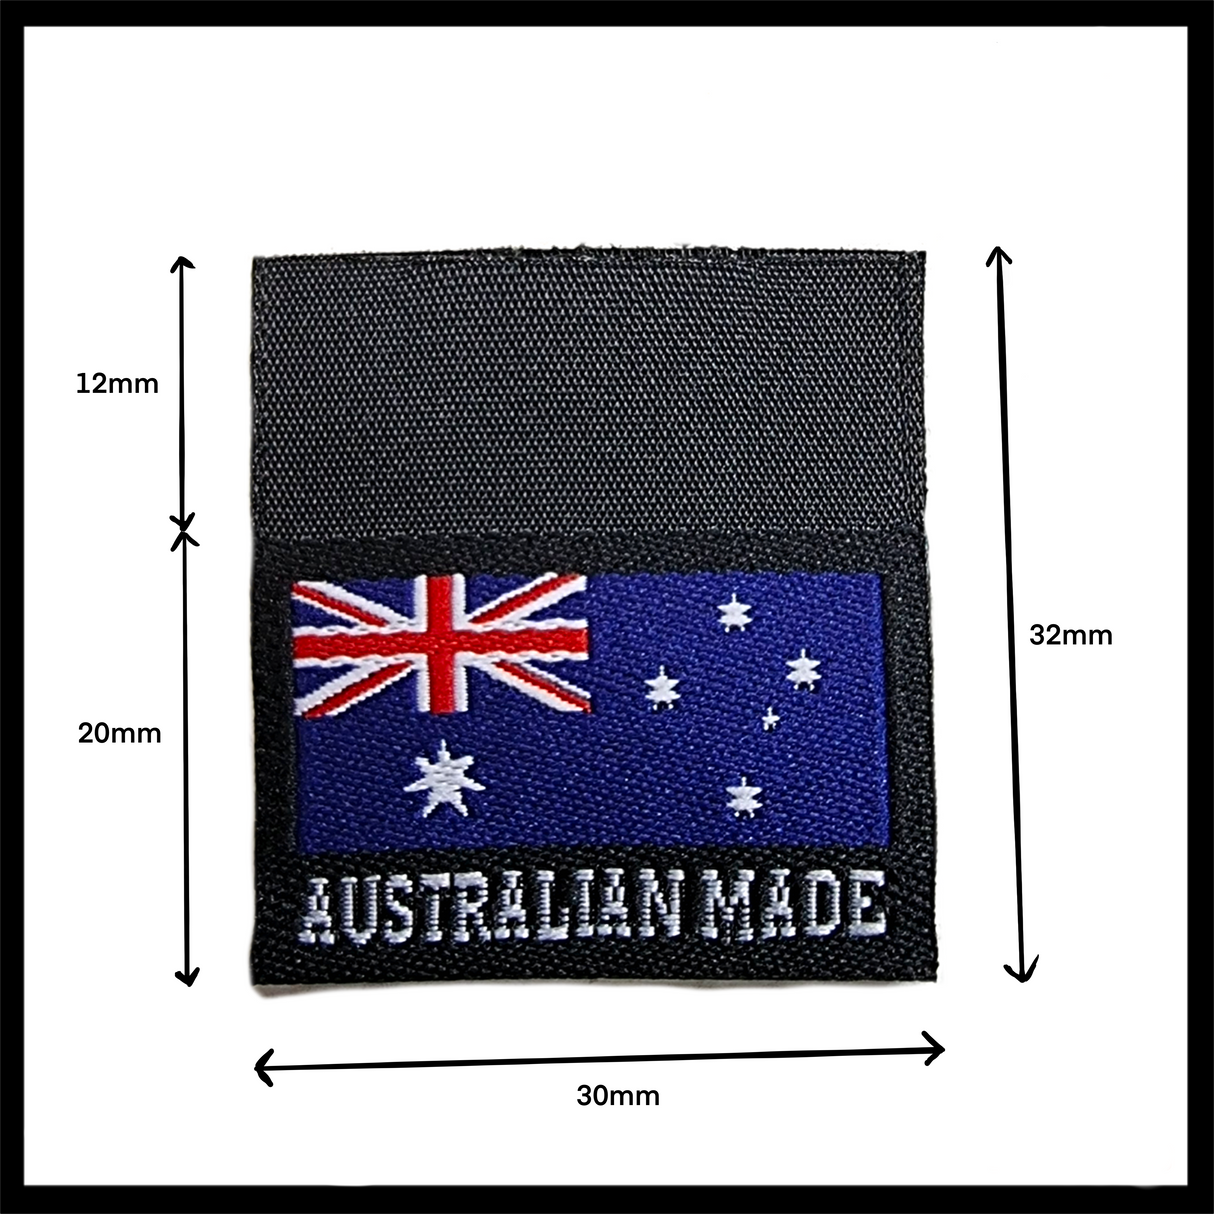 M8Tex "Australian Made" Sew-On Woven Labels